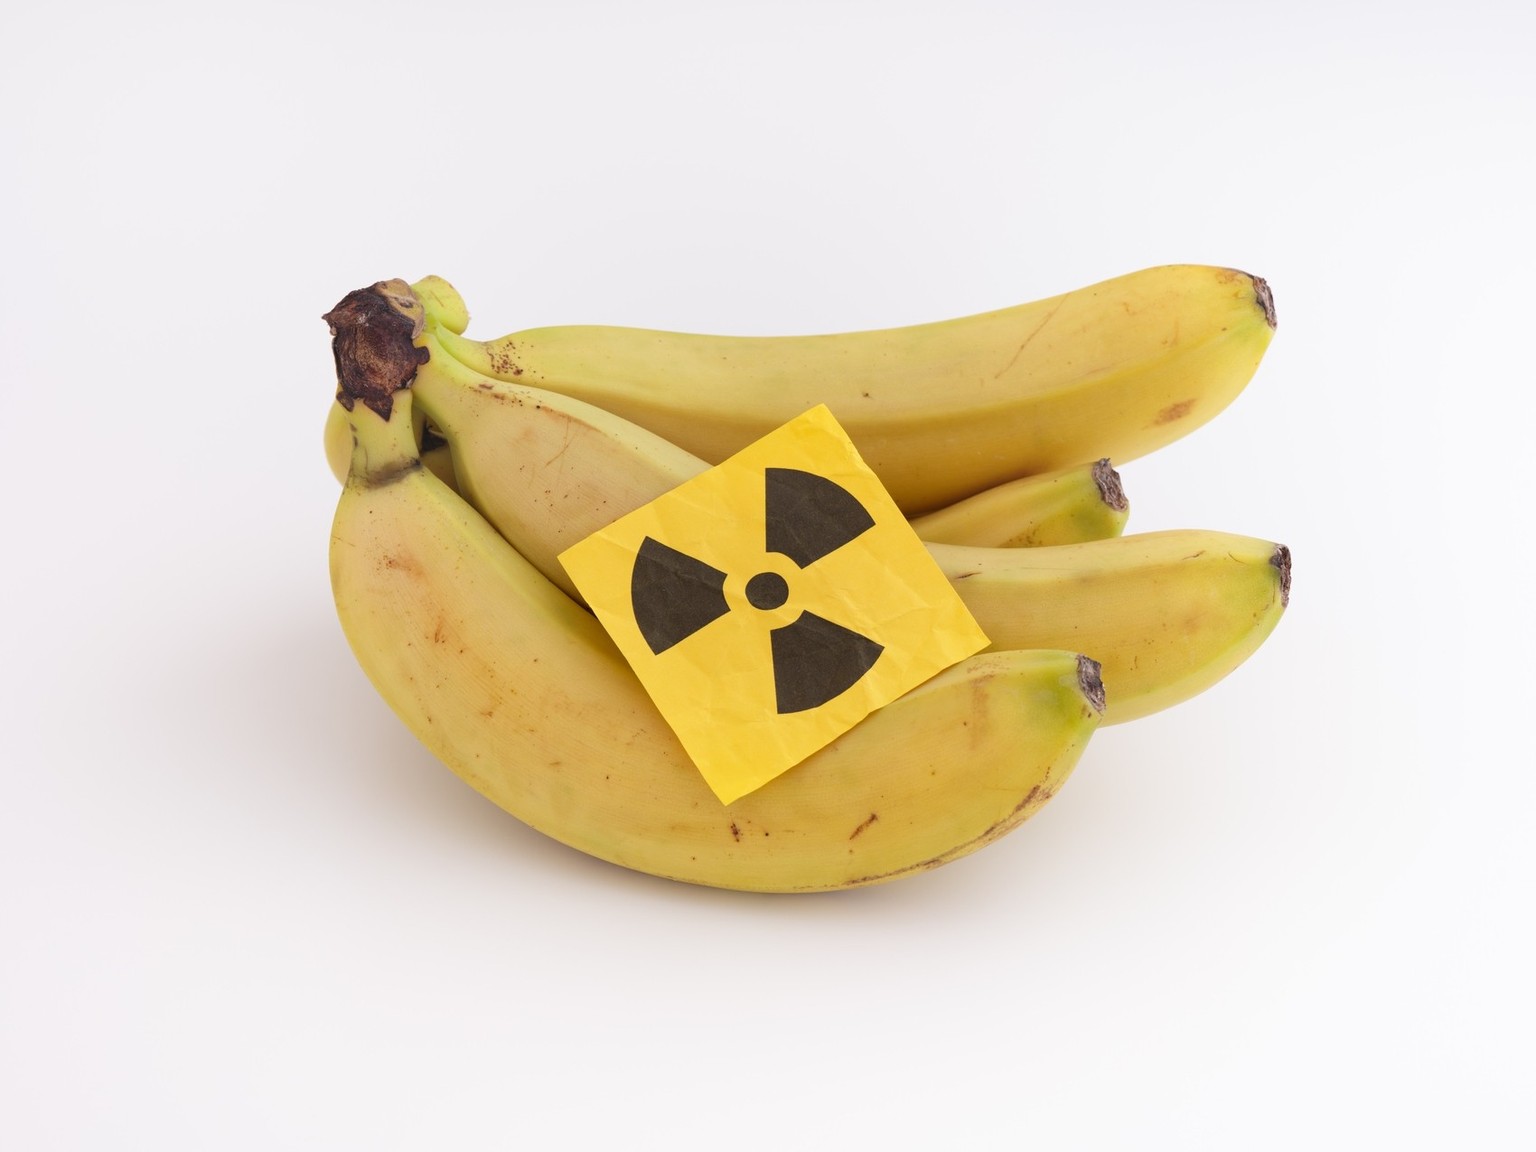 A bunch of bananas with a radiation warning sign on them. Close up. xkwx banana, bunch, diet, food, contamination, radiation sign, radiation symbol, radioactive, radiation, concept, nuclear, plutonium ...